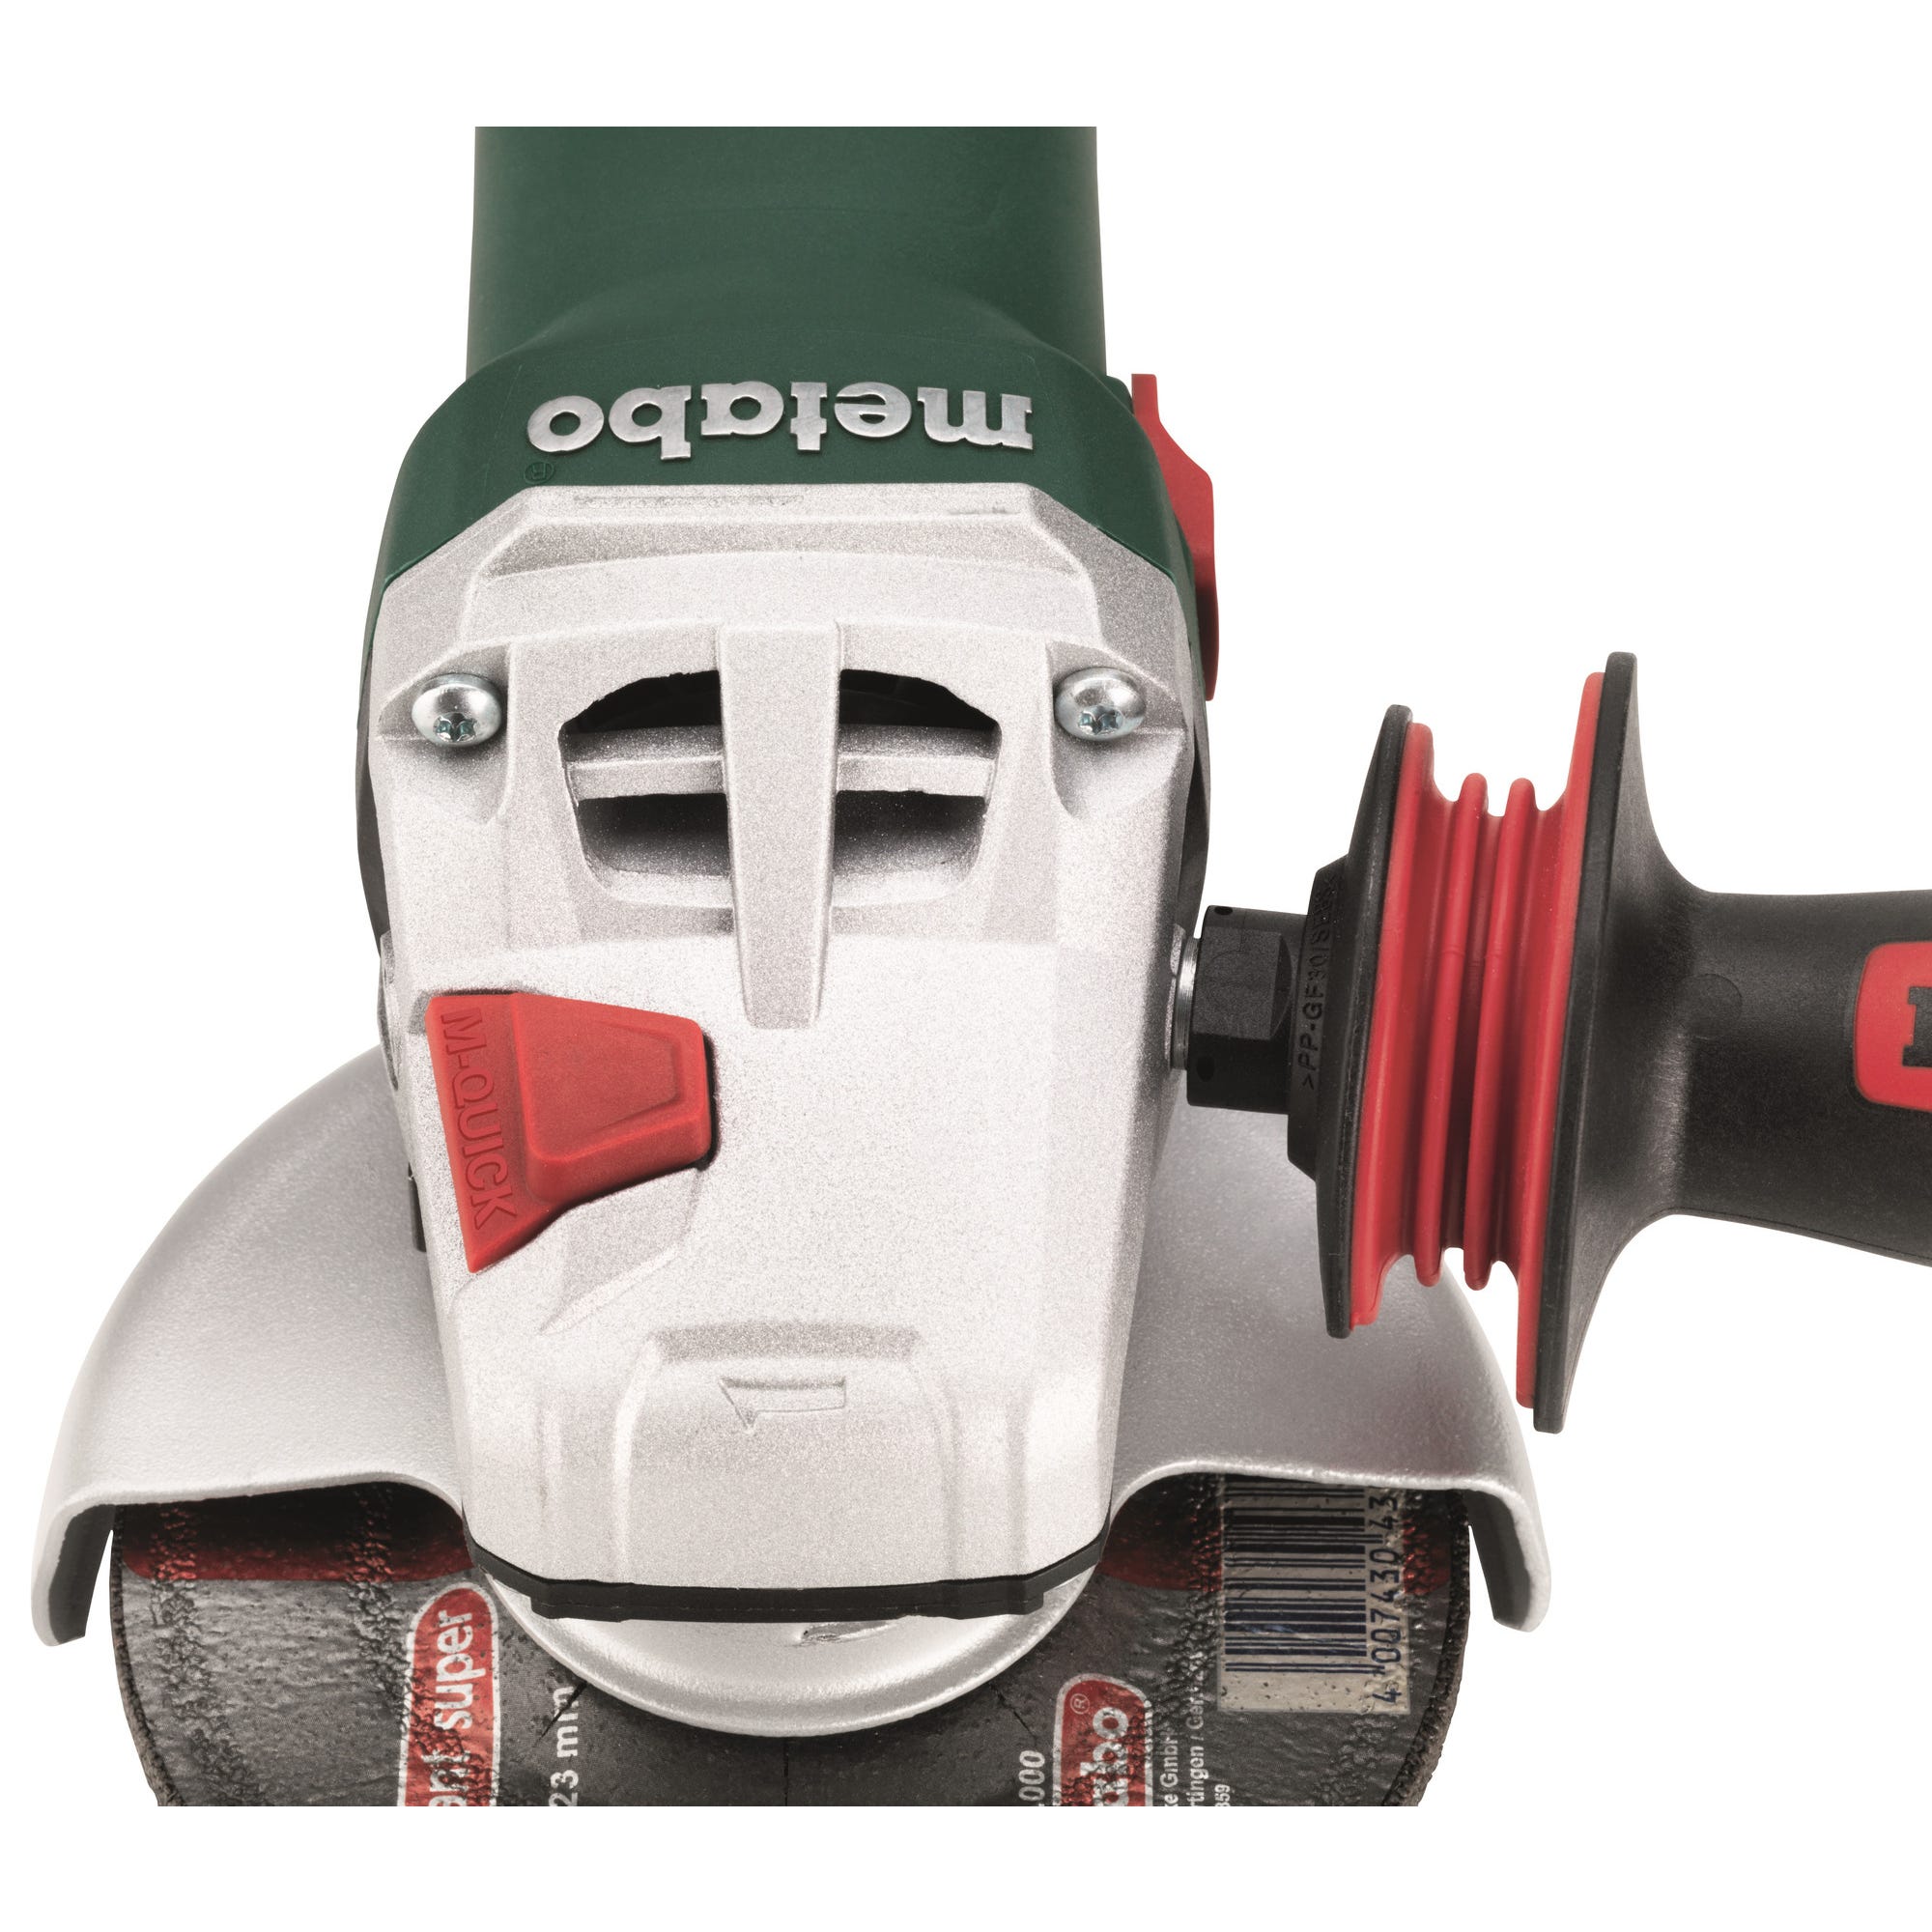 Meuleuse d'angle filaire 1500 W Diam.125 mm WE 15-125 Quick - METABO - 600448000  1